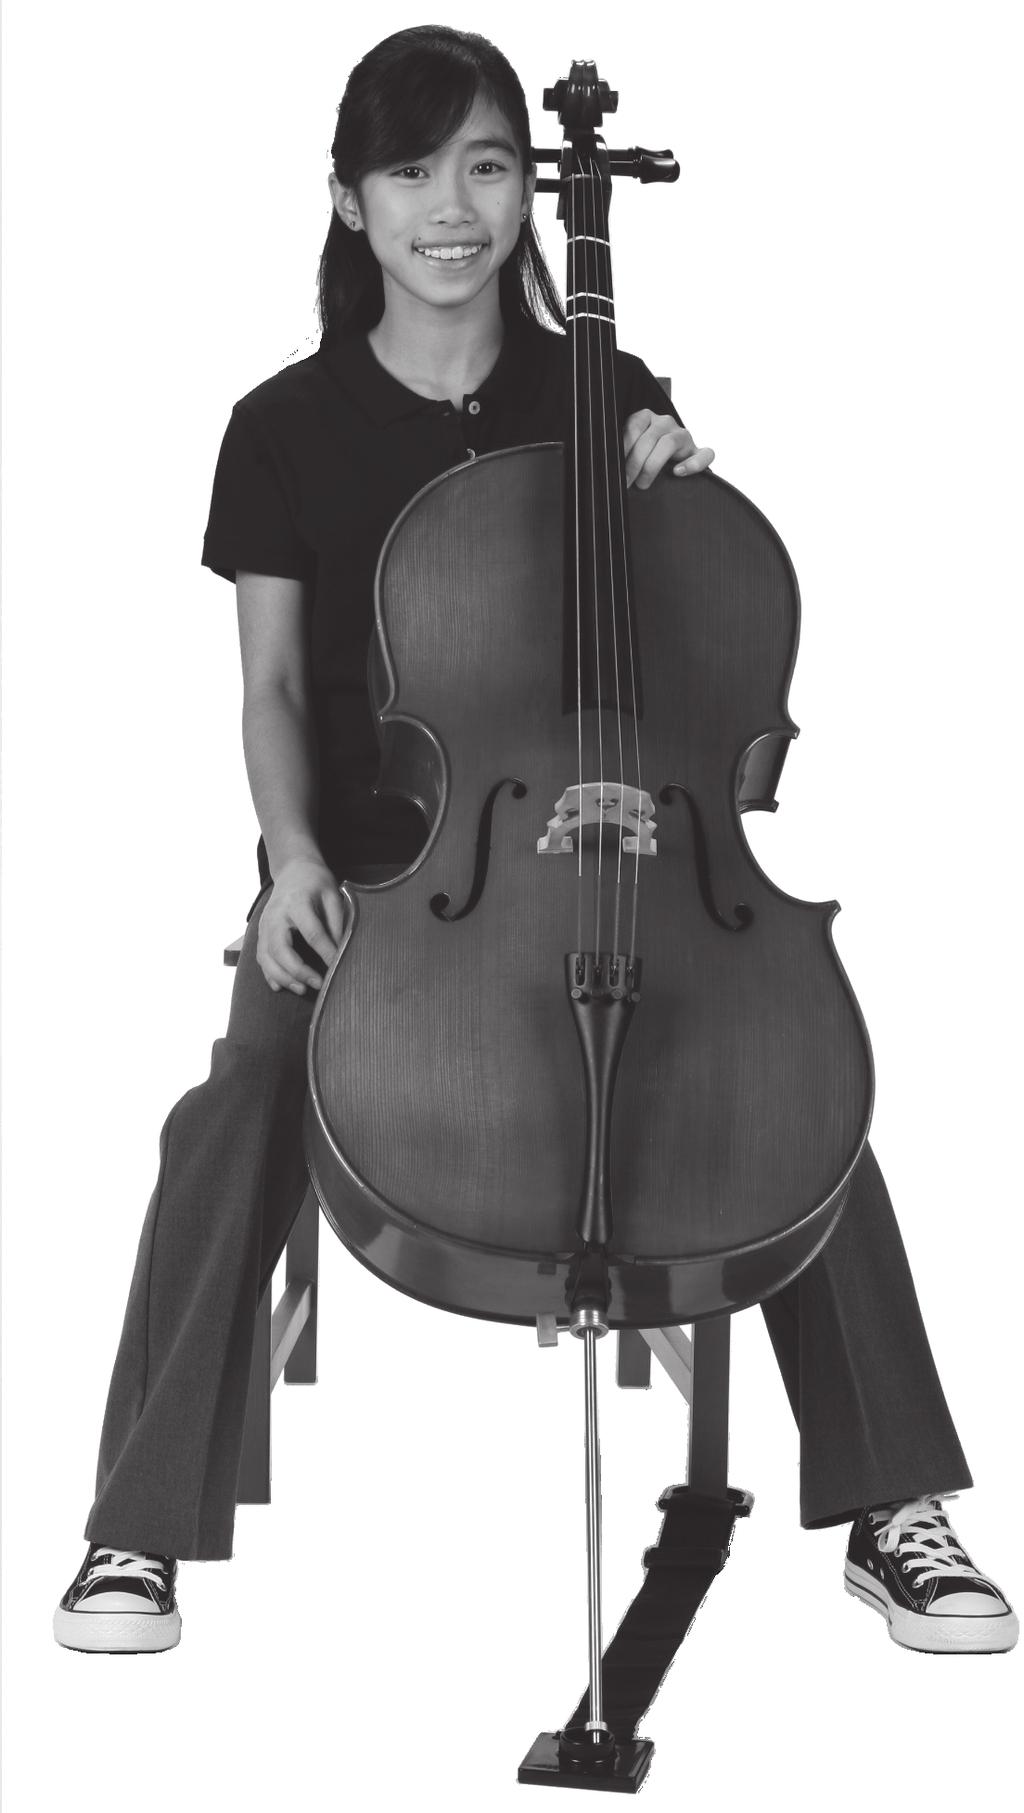 19 Review: Holding Your Cello Playing Position If you need it, extend an endpin strap from a chair leg or place